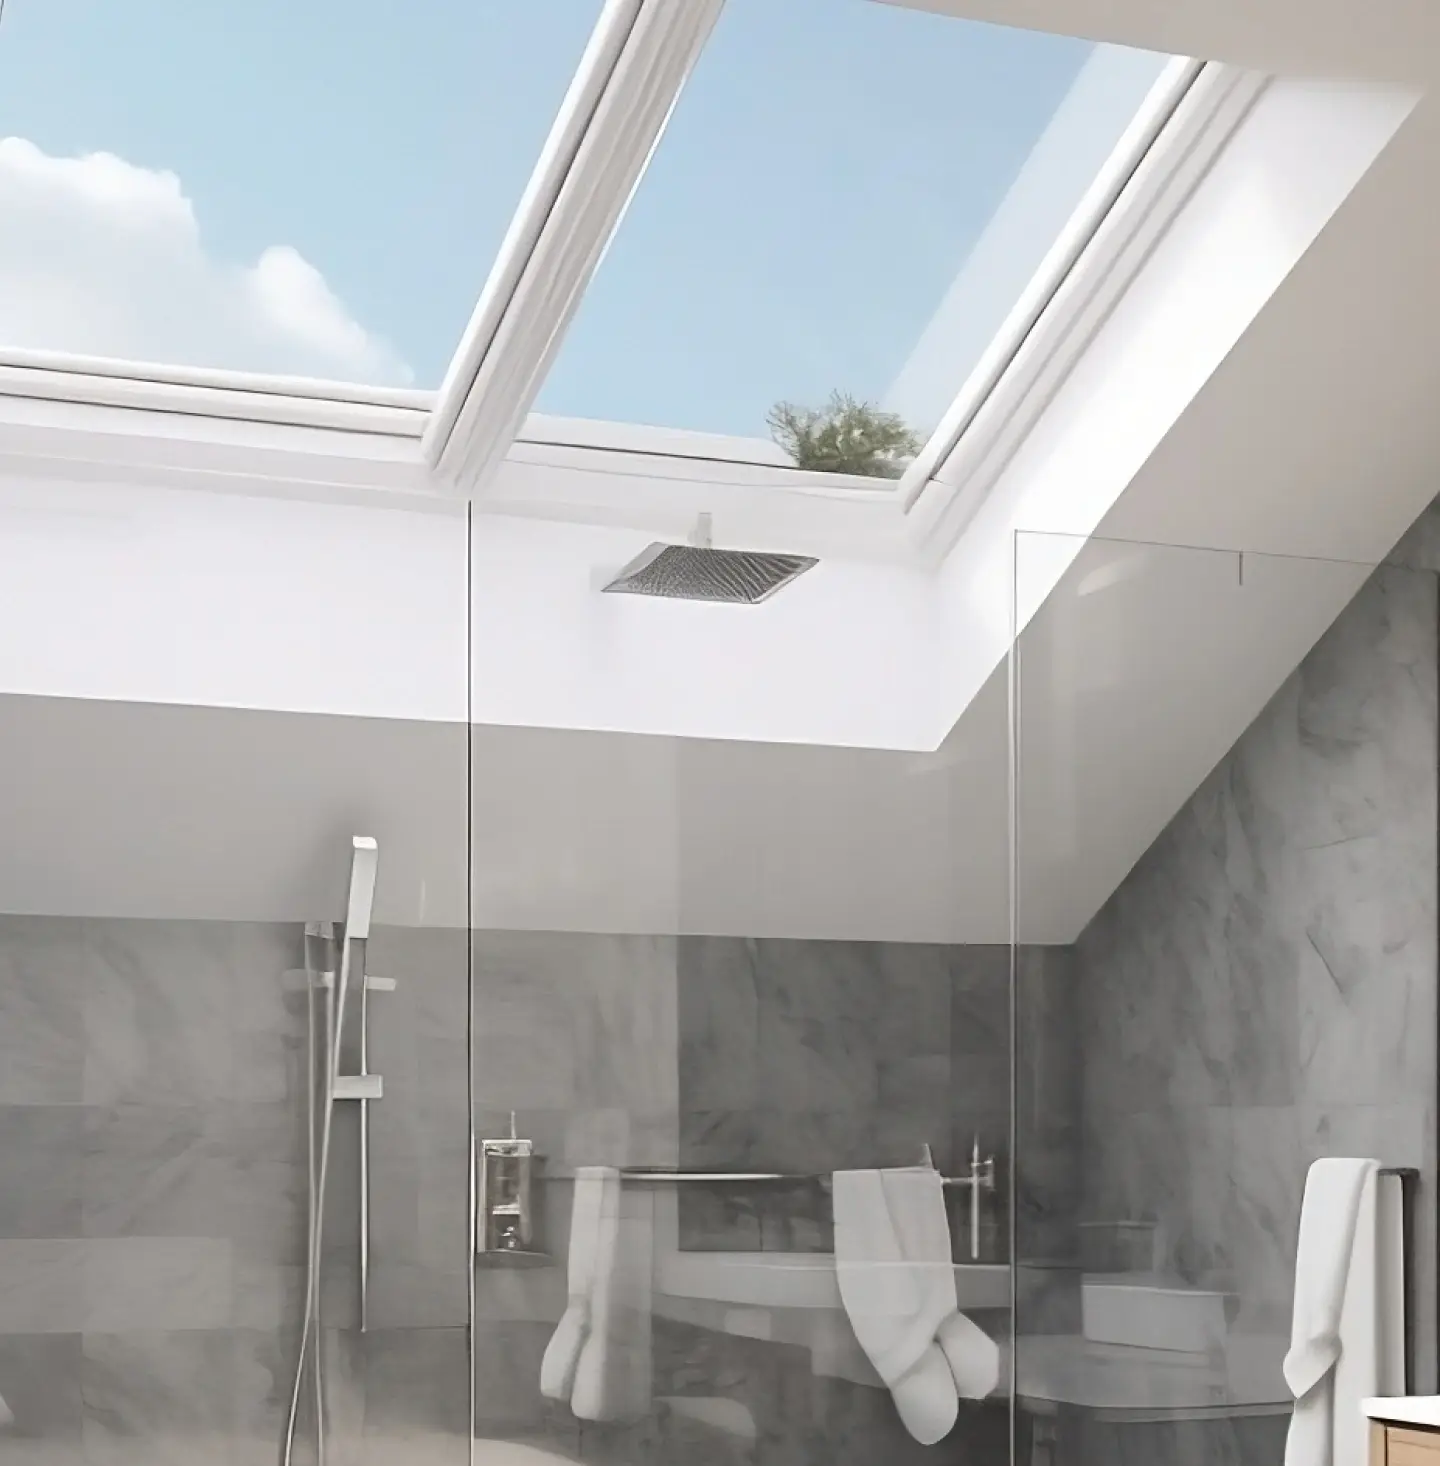 Large glass shower with full-ceiling skylight letting in light from above.